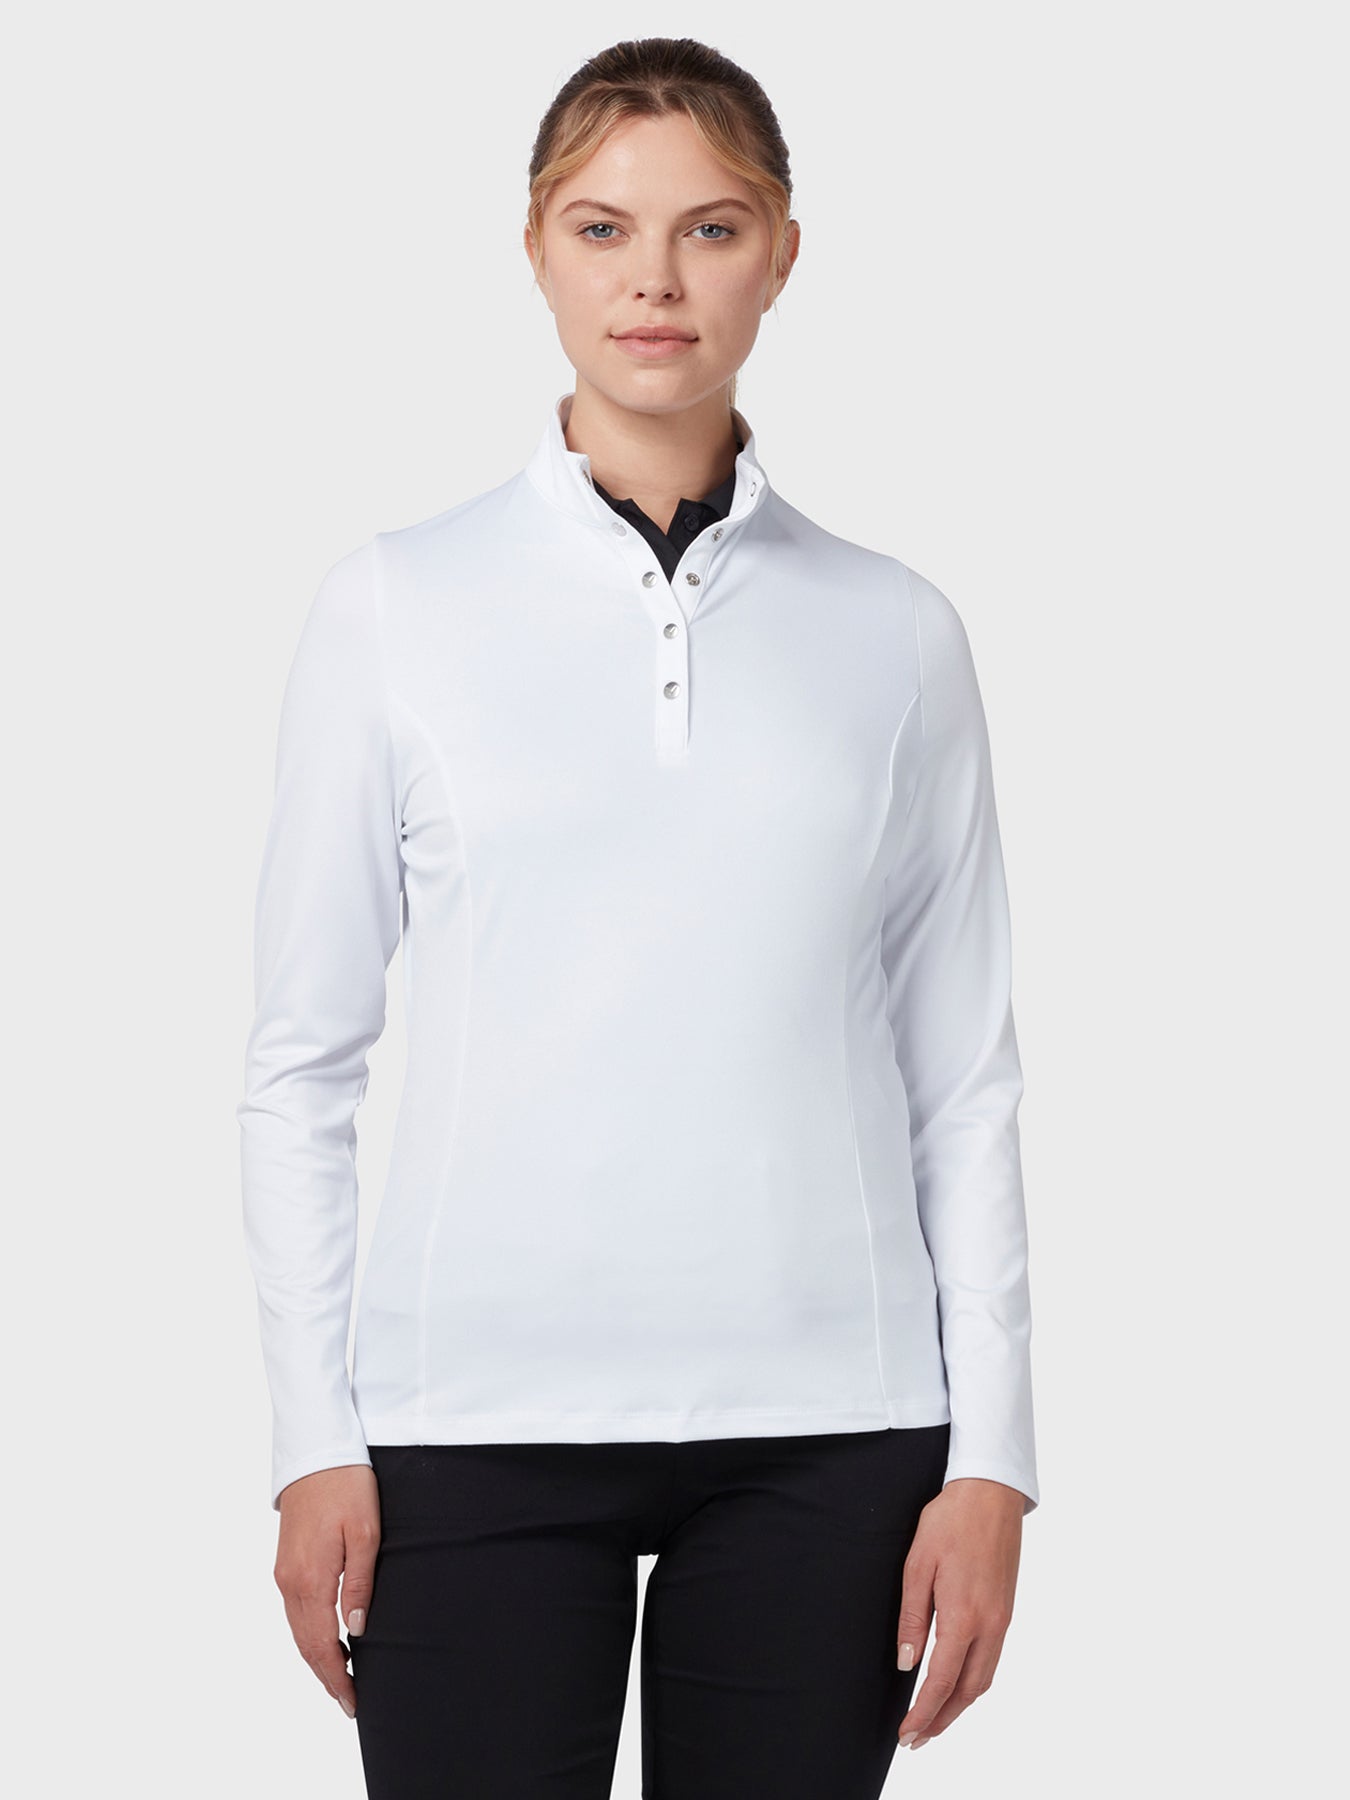 View Womens Thermal Longsleeve Fleece Back Jersey Polo In Brilliant White Brilliant White L information